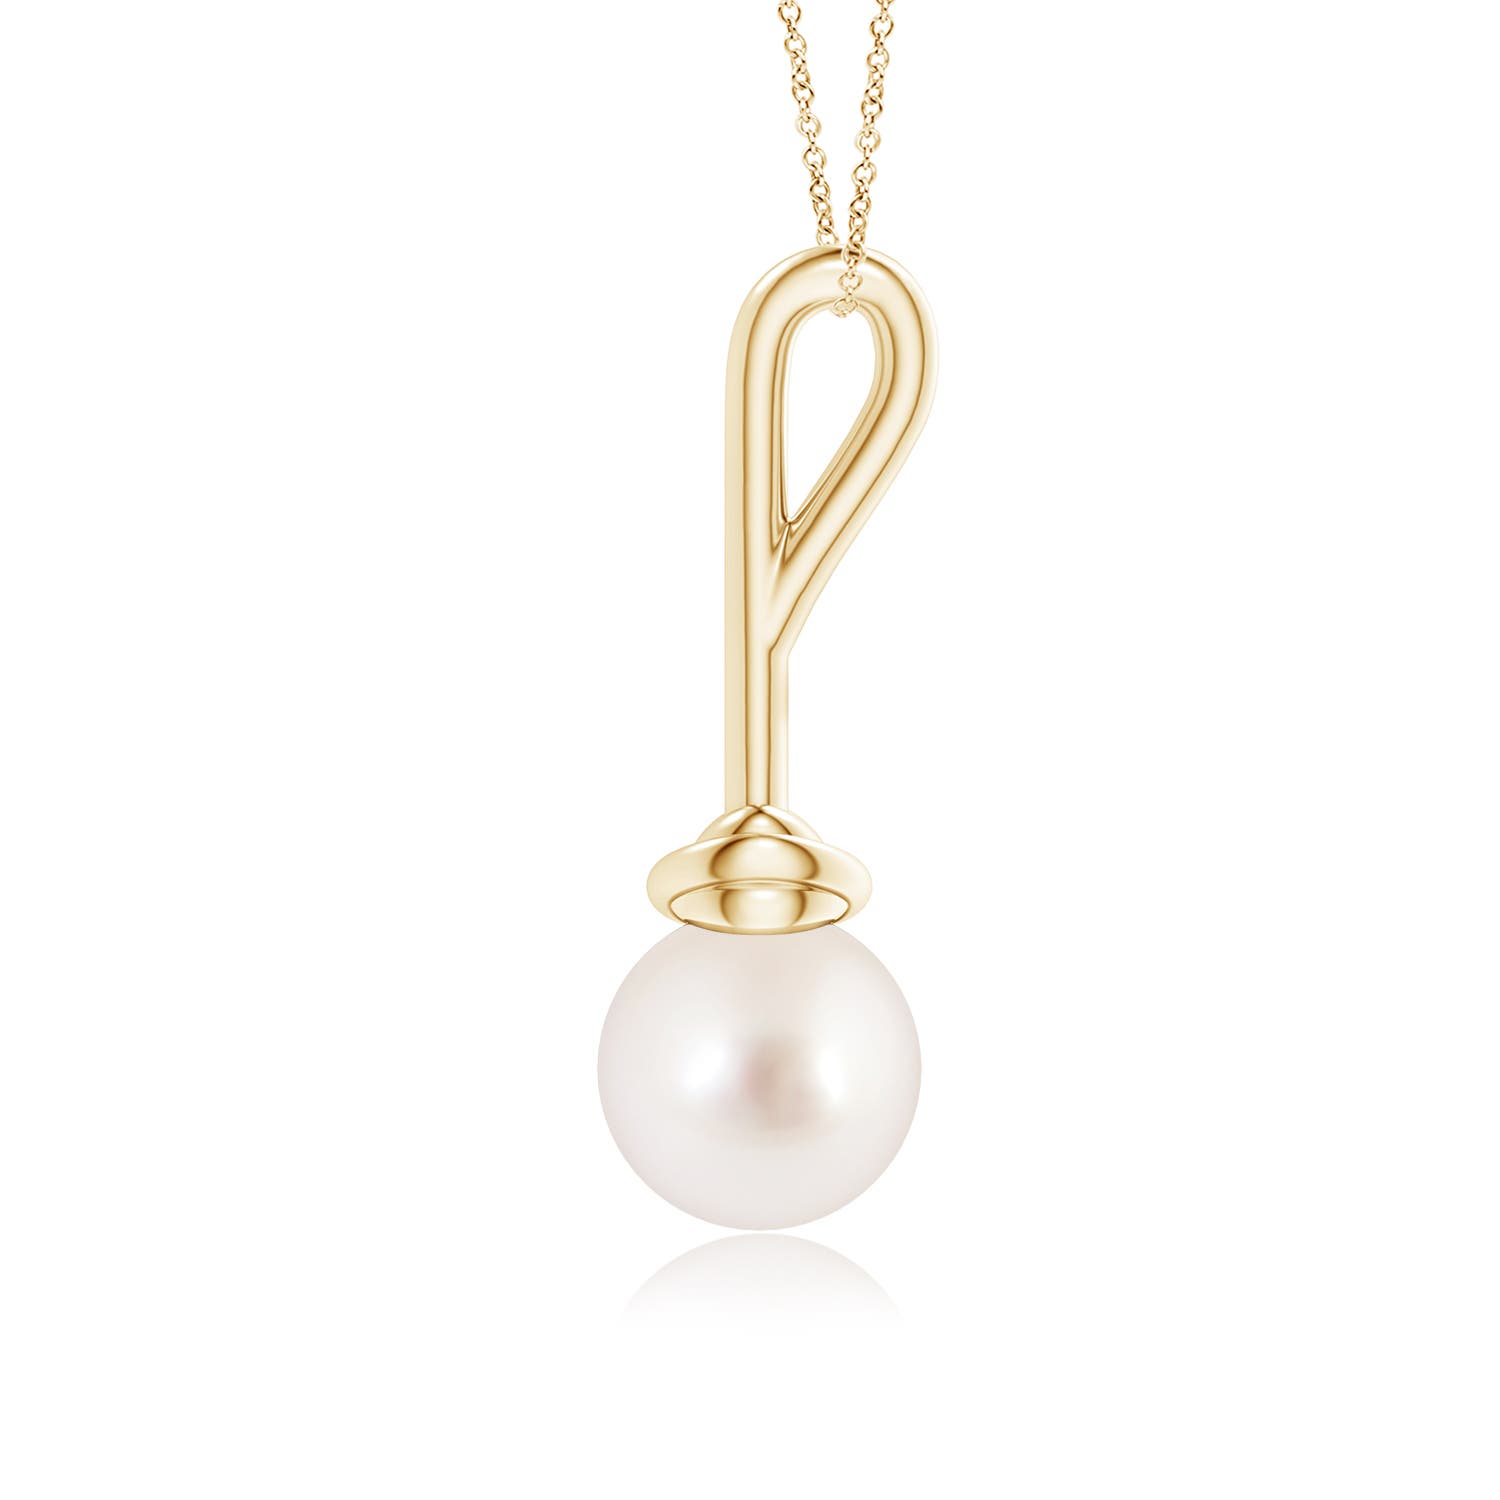 AAAA - South Sea Cultured Pearl / 5.25 CT / 14 KT Yellow Gold